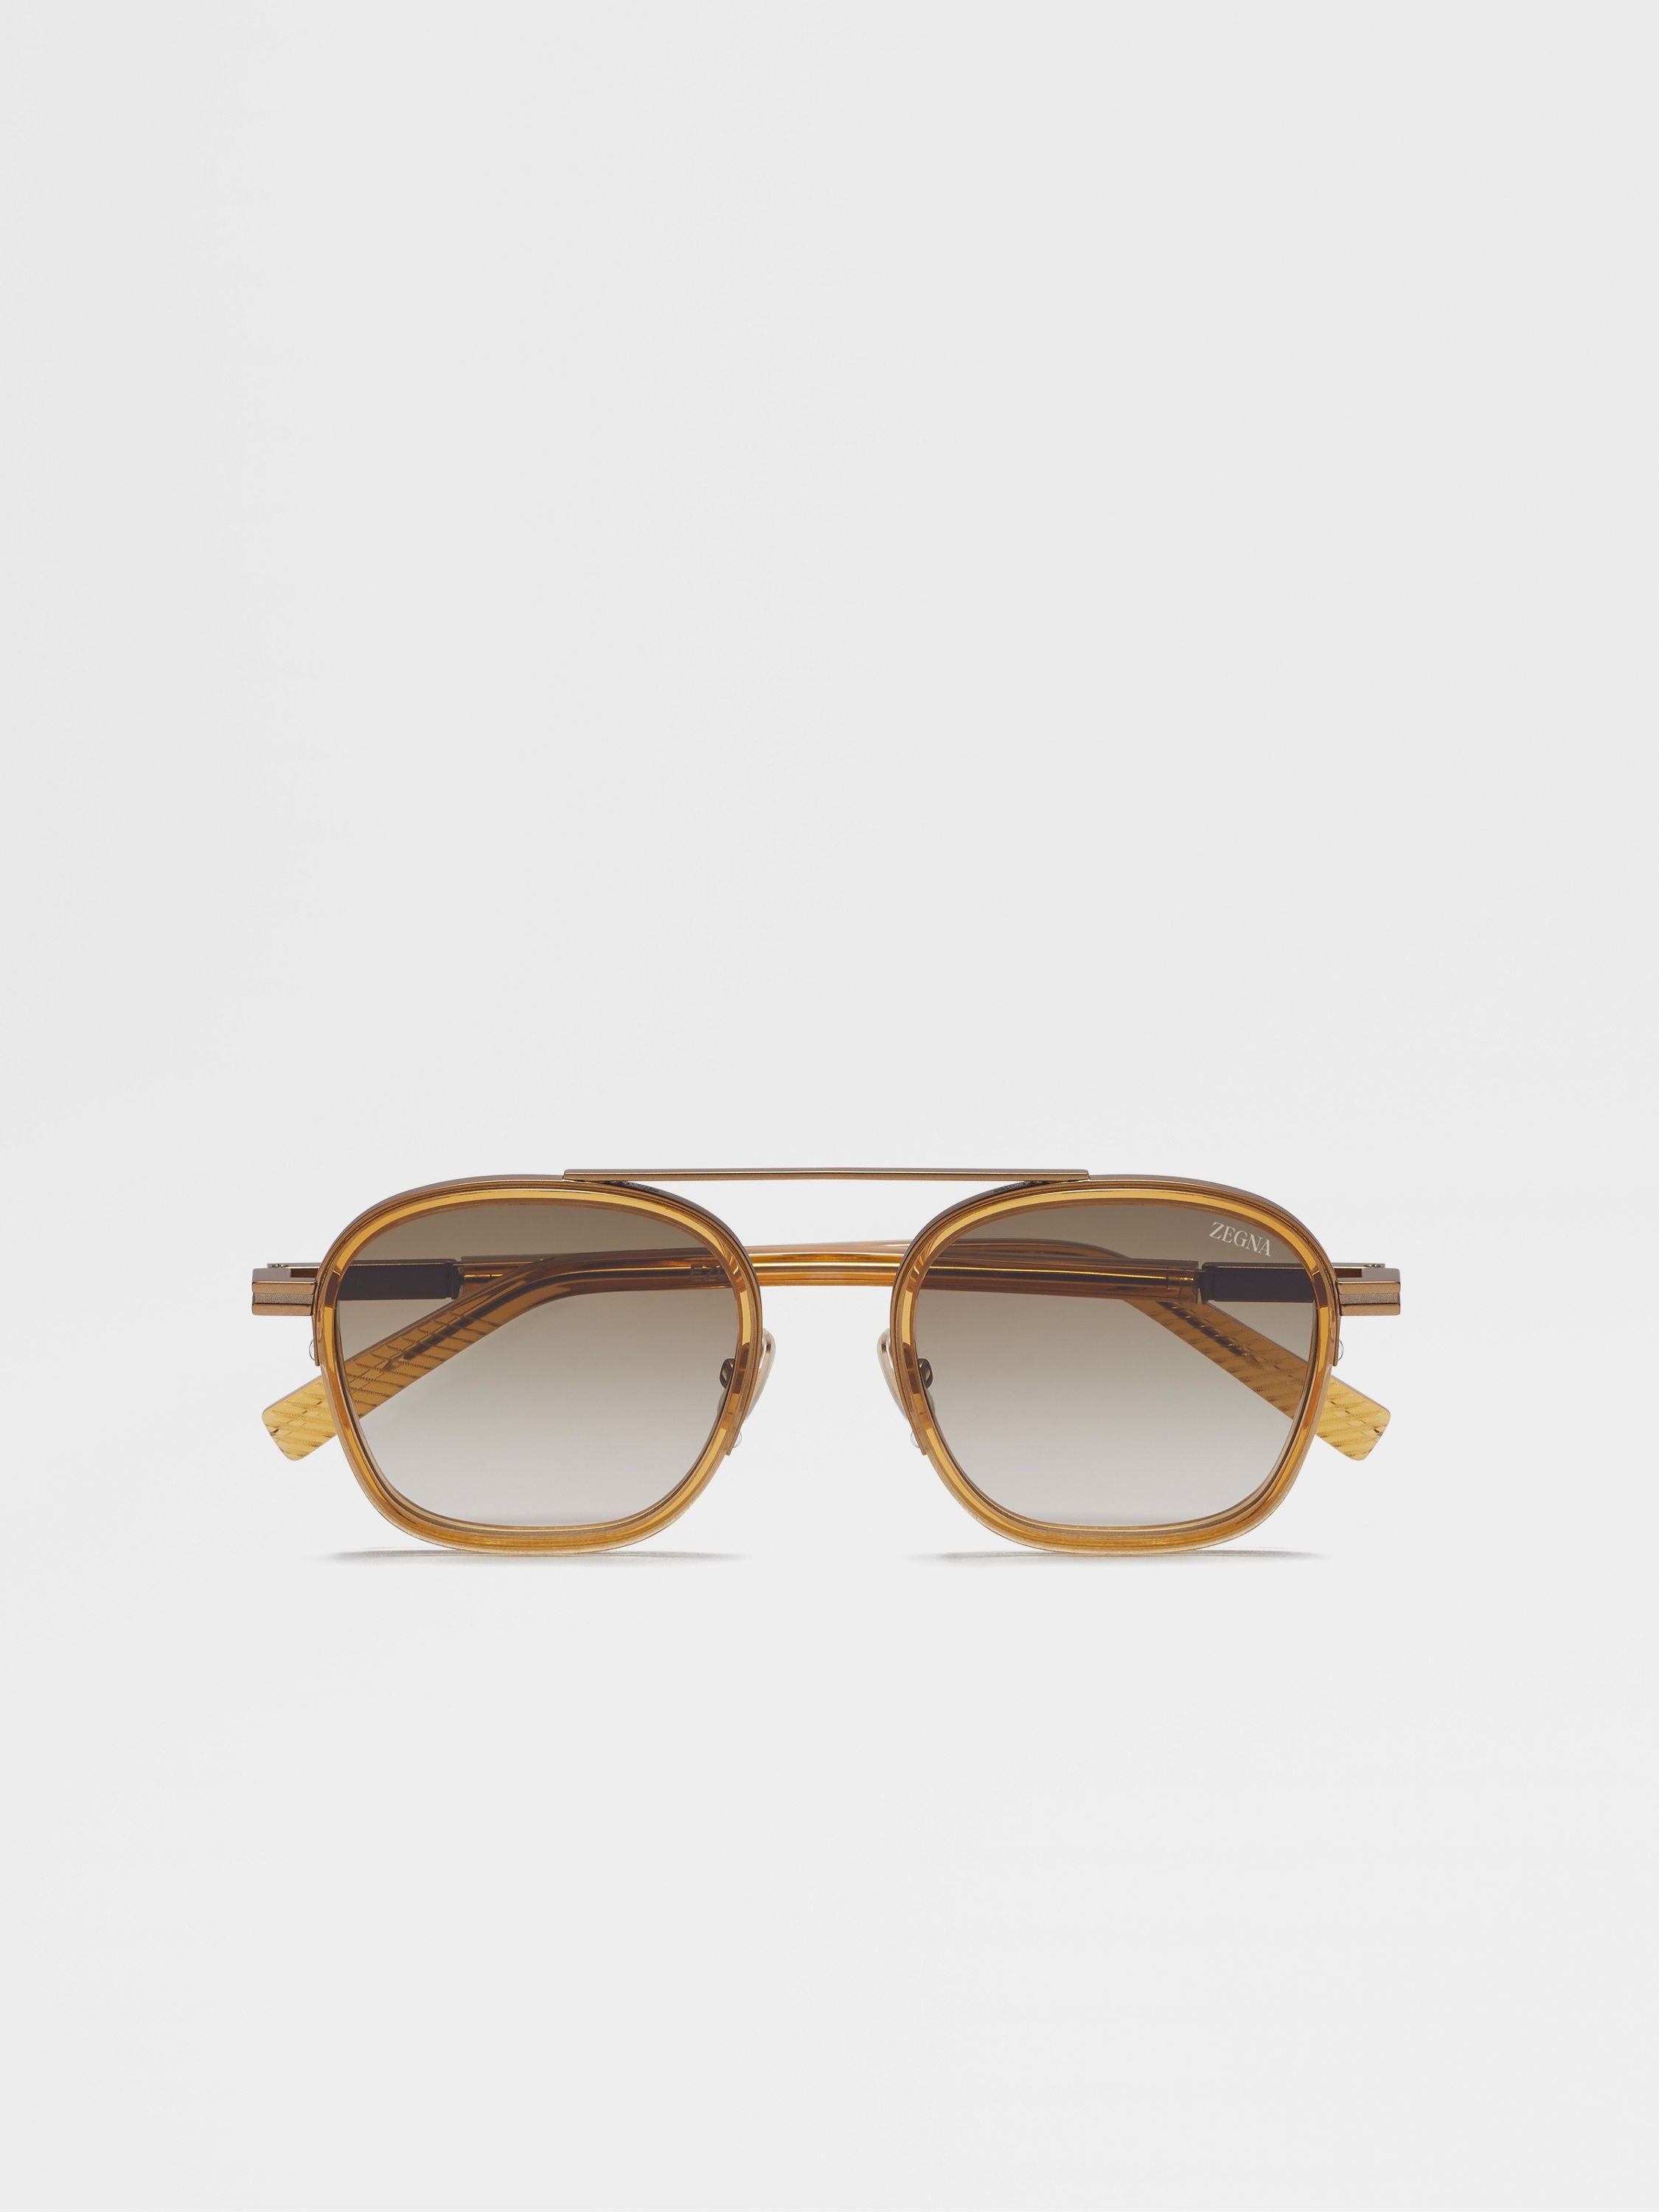 TRANSPARENT GOLDEN SYRUP ORIZZONTE I ACETATE AND METAL SUNGLASSES - 1